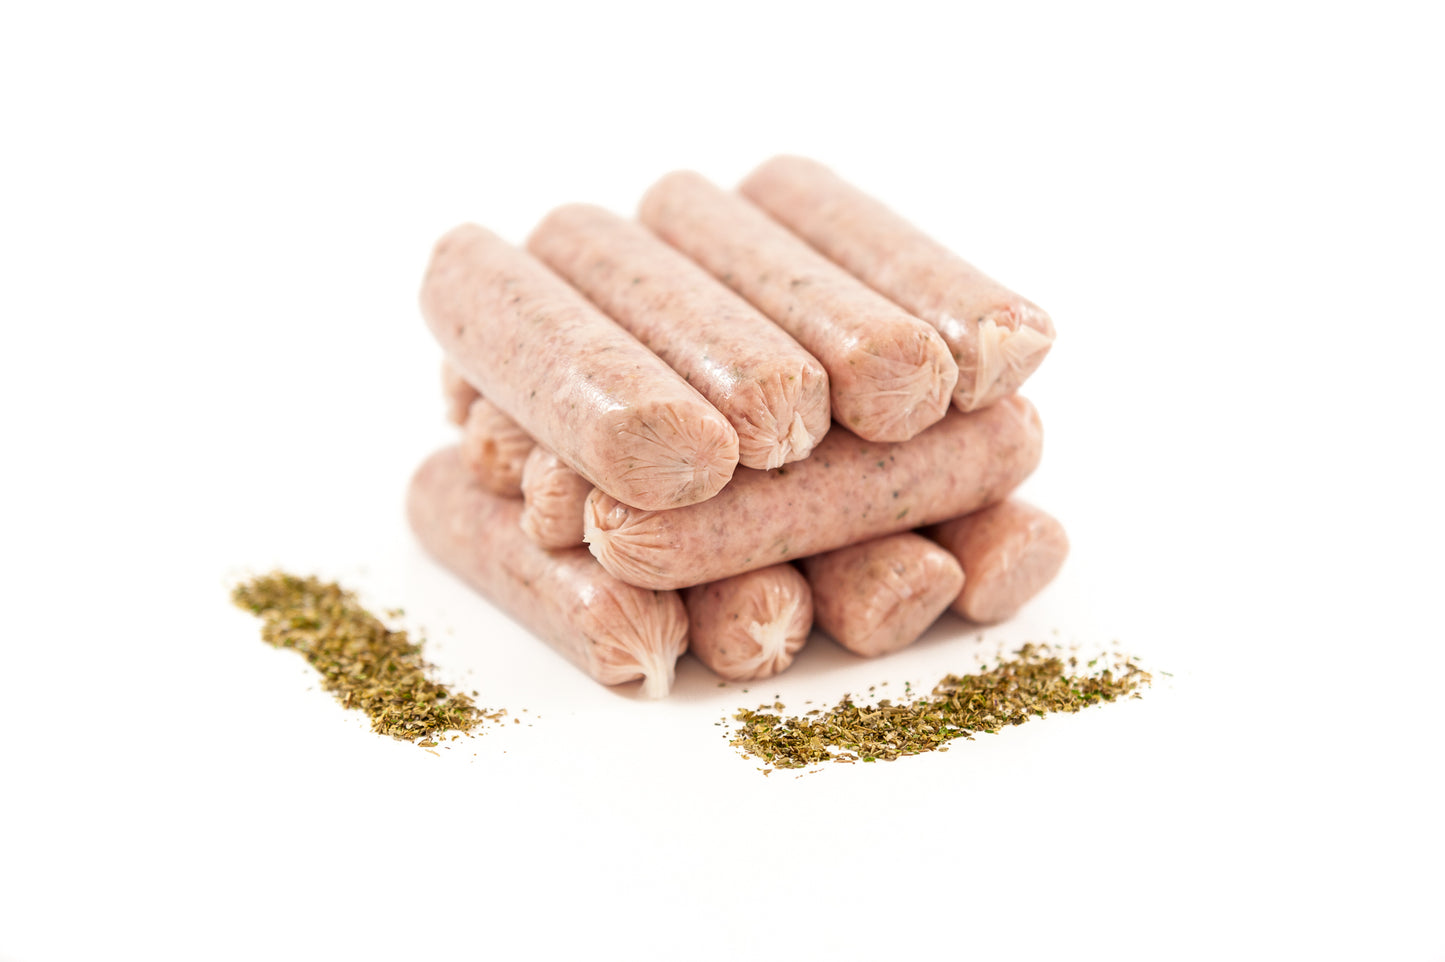 Turkey Breast Sausage 350g pack. High protein and low fat this is currently our best selling sausage | Online Butcher Ireland